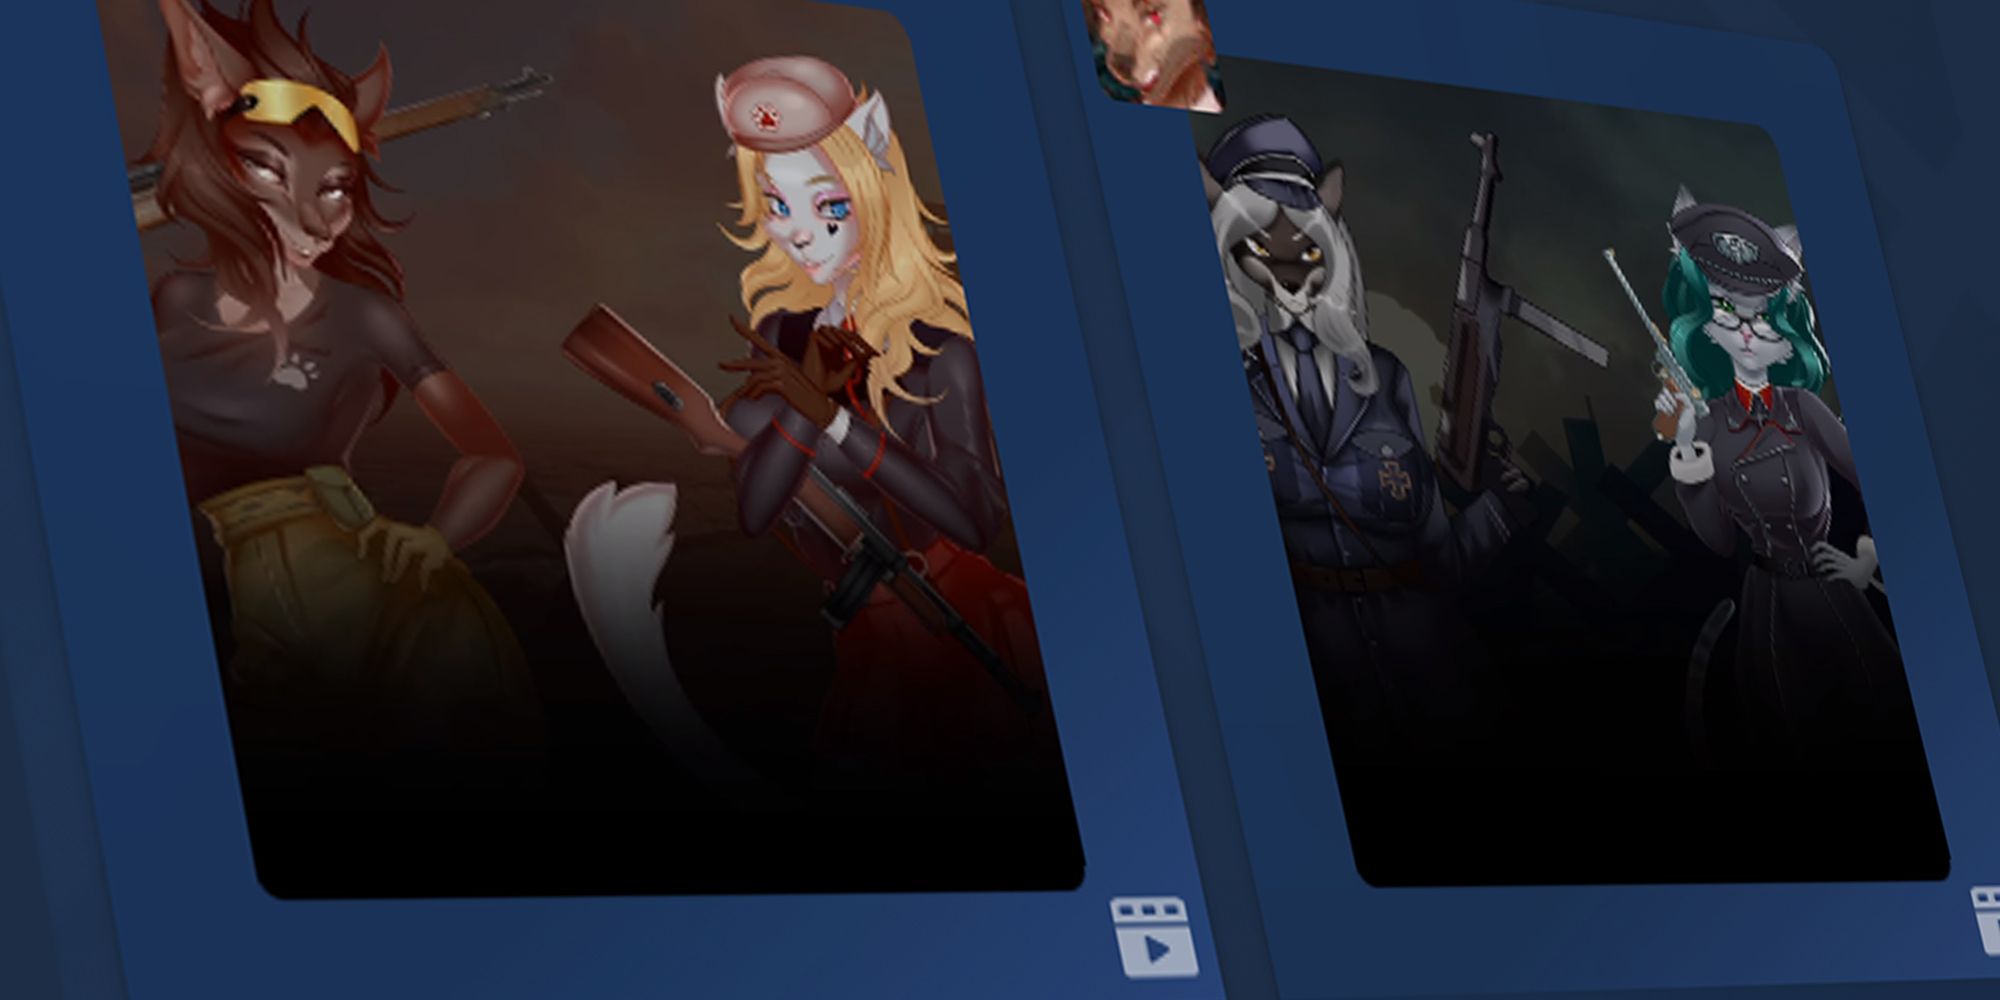 Steam mini-profiles in the Item Shop, Furry Girls 1 and 2 with Nazi animal humanoids